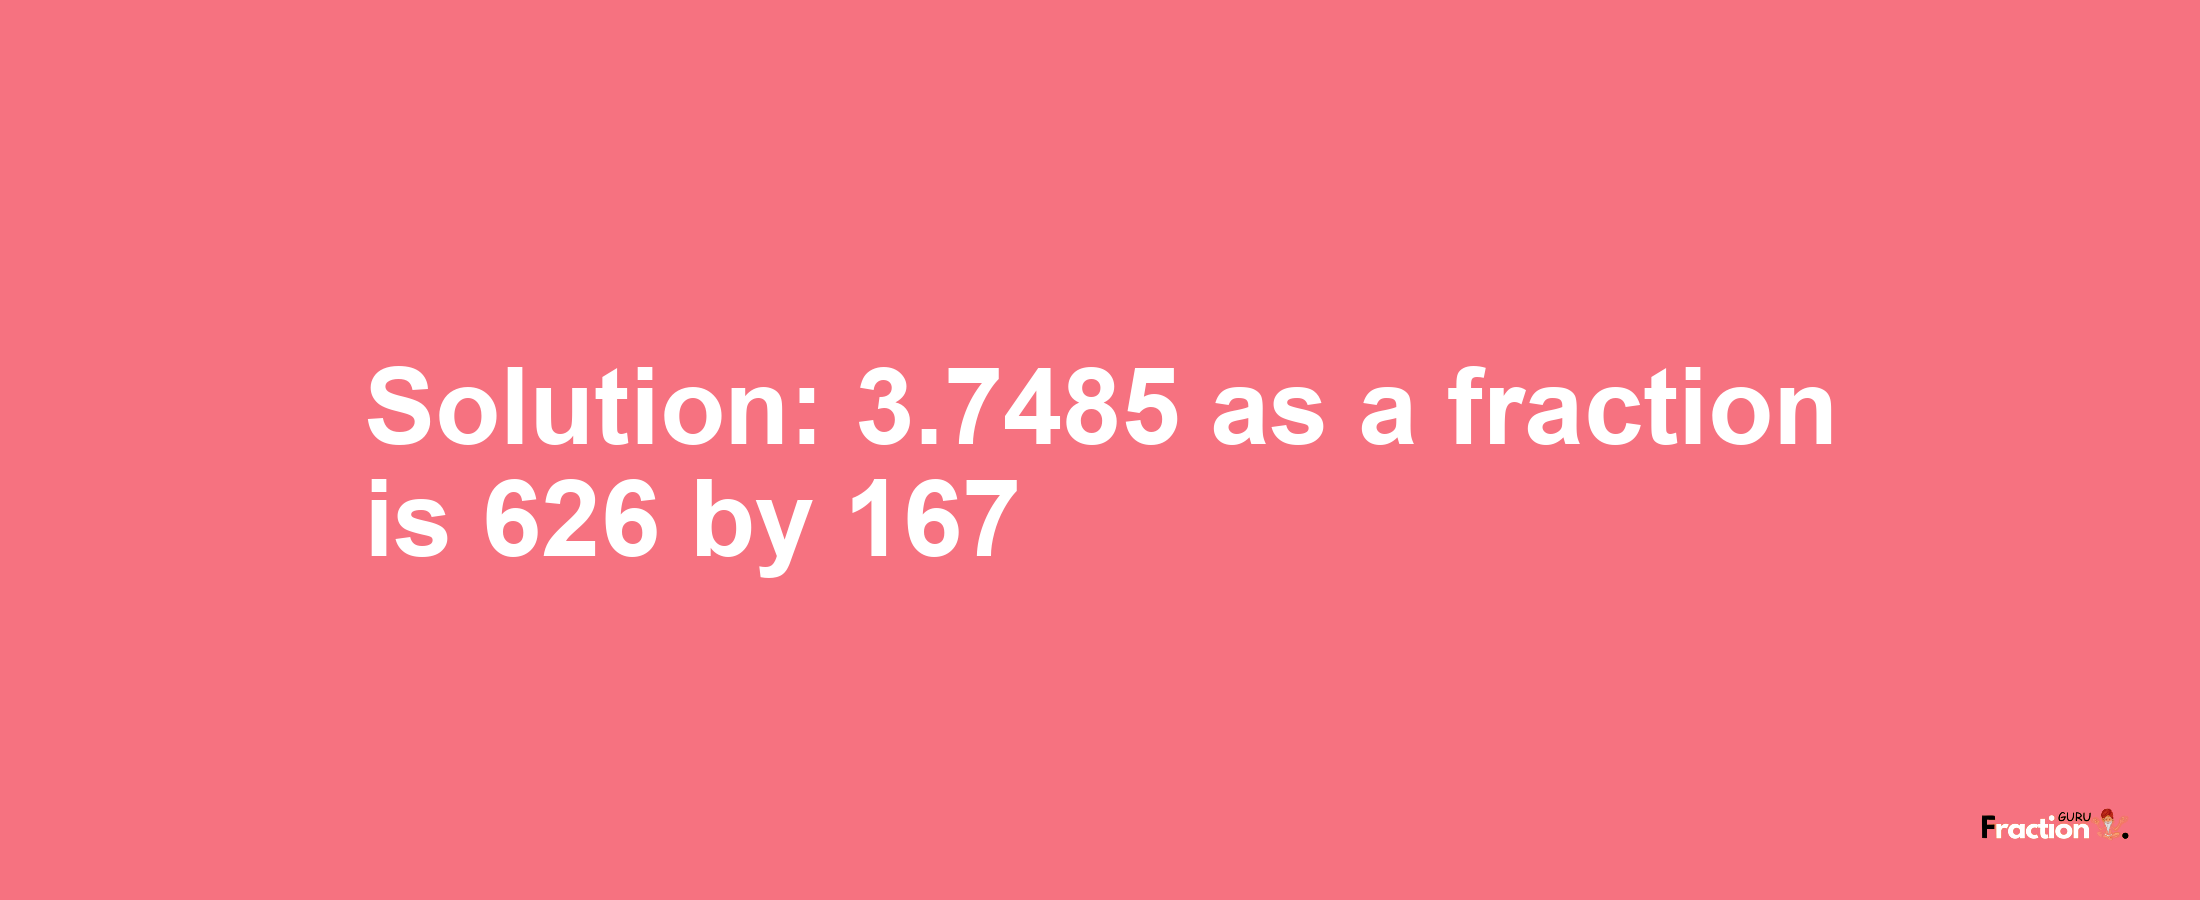 Solution:3.7485 as a fraction is 626/167